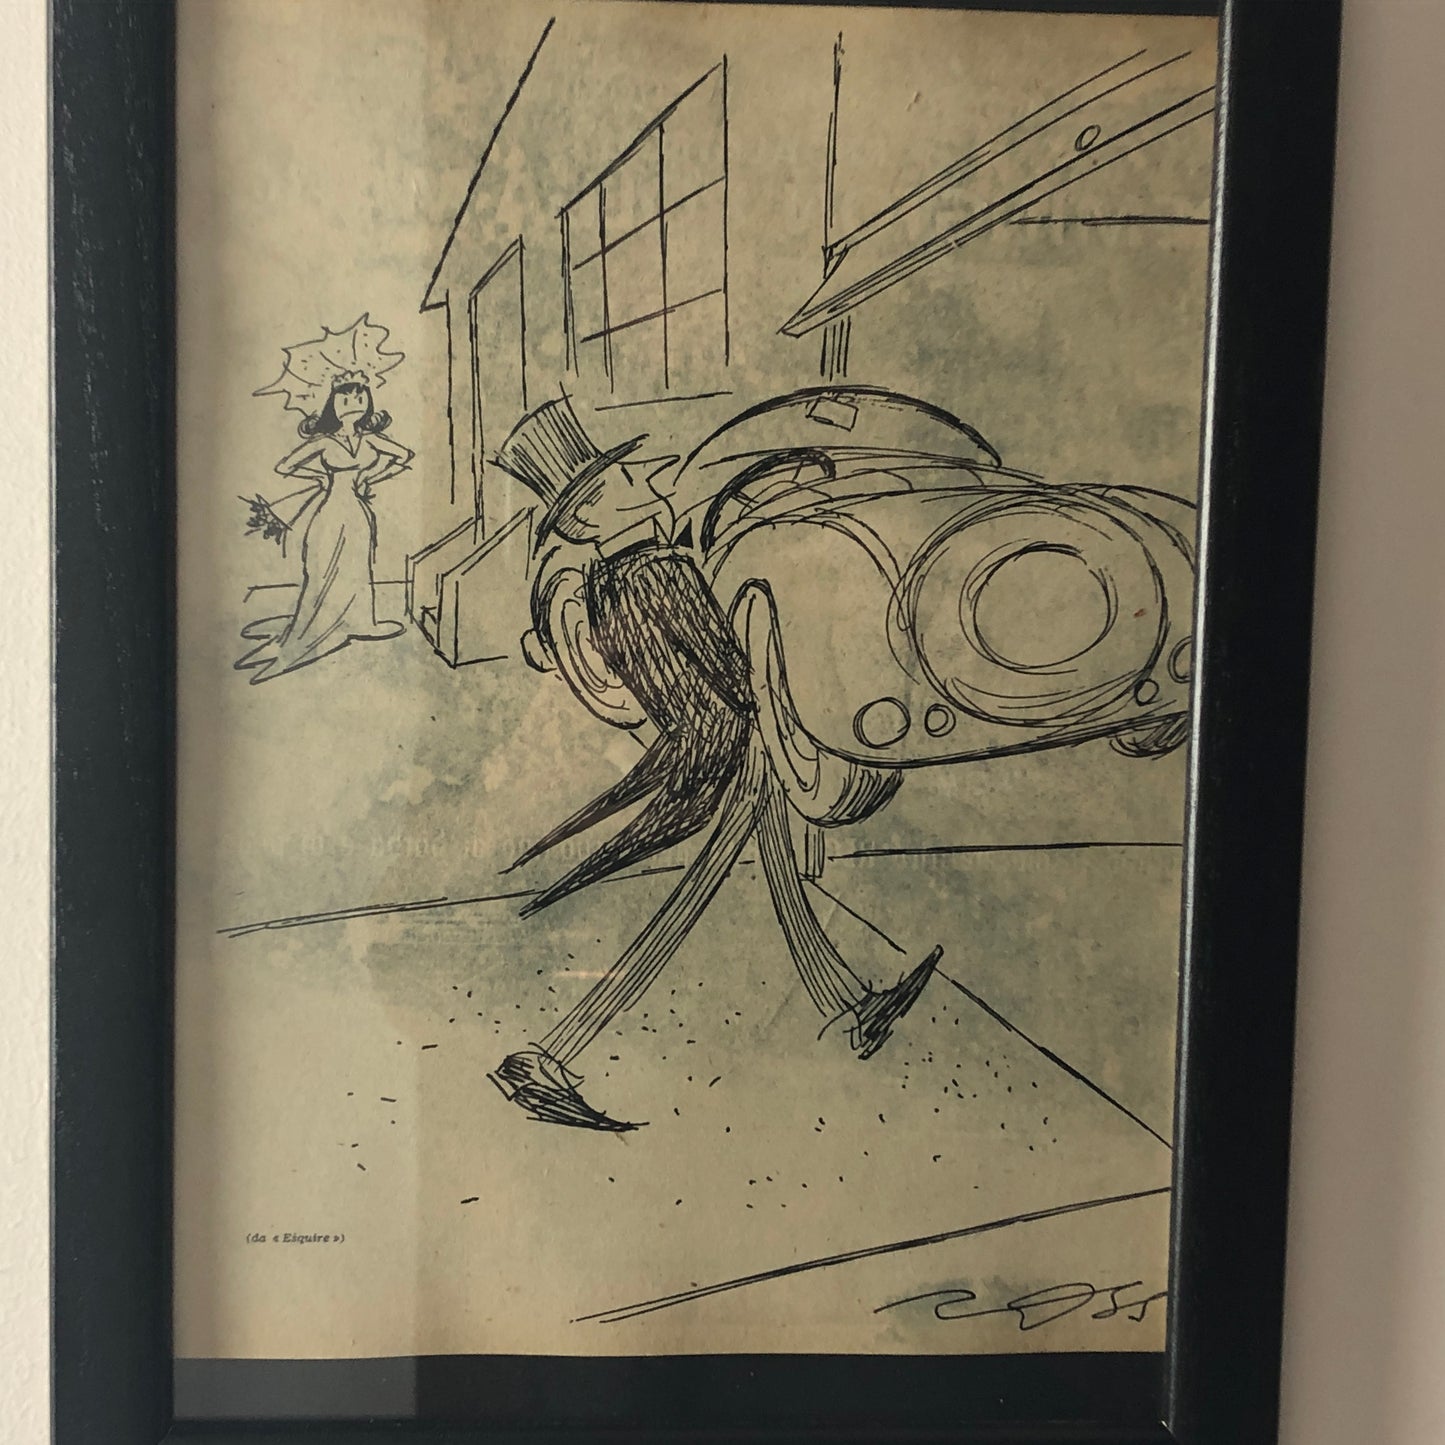 Automobilia, Humorous Drawing by Al Ross Year 1960 Published in Esquire Magazine